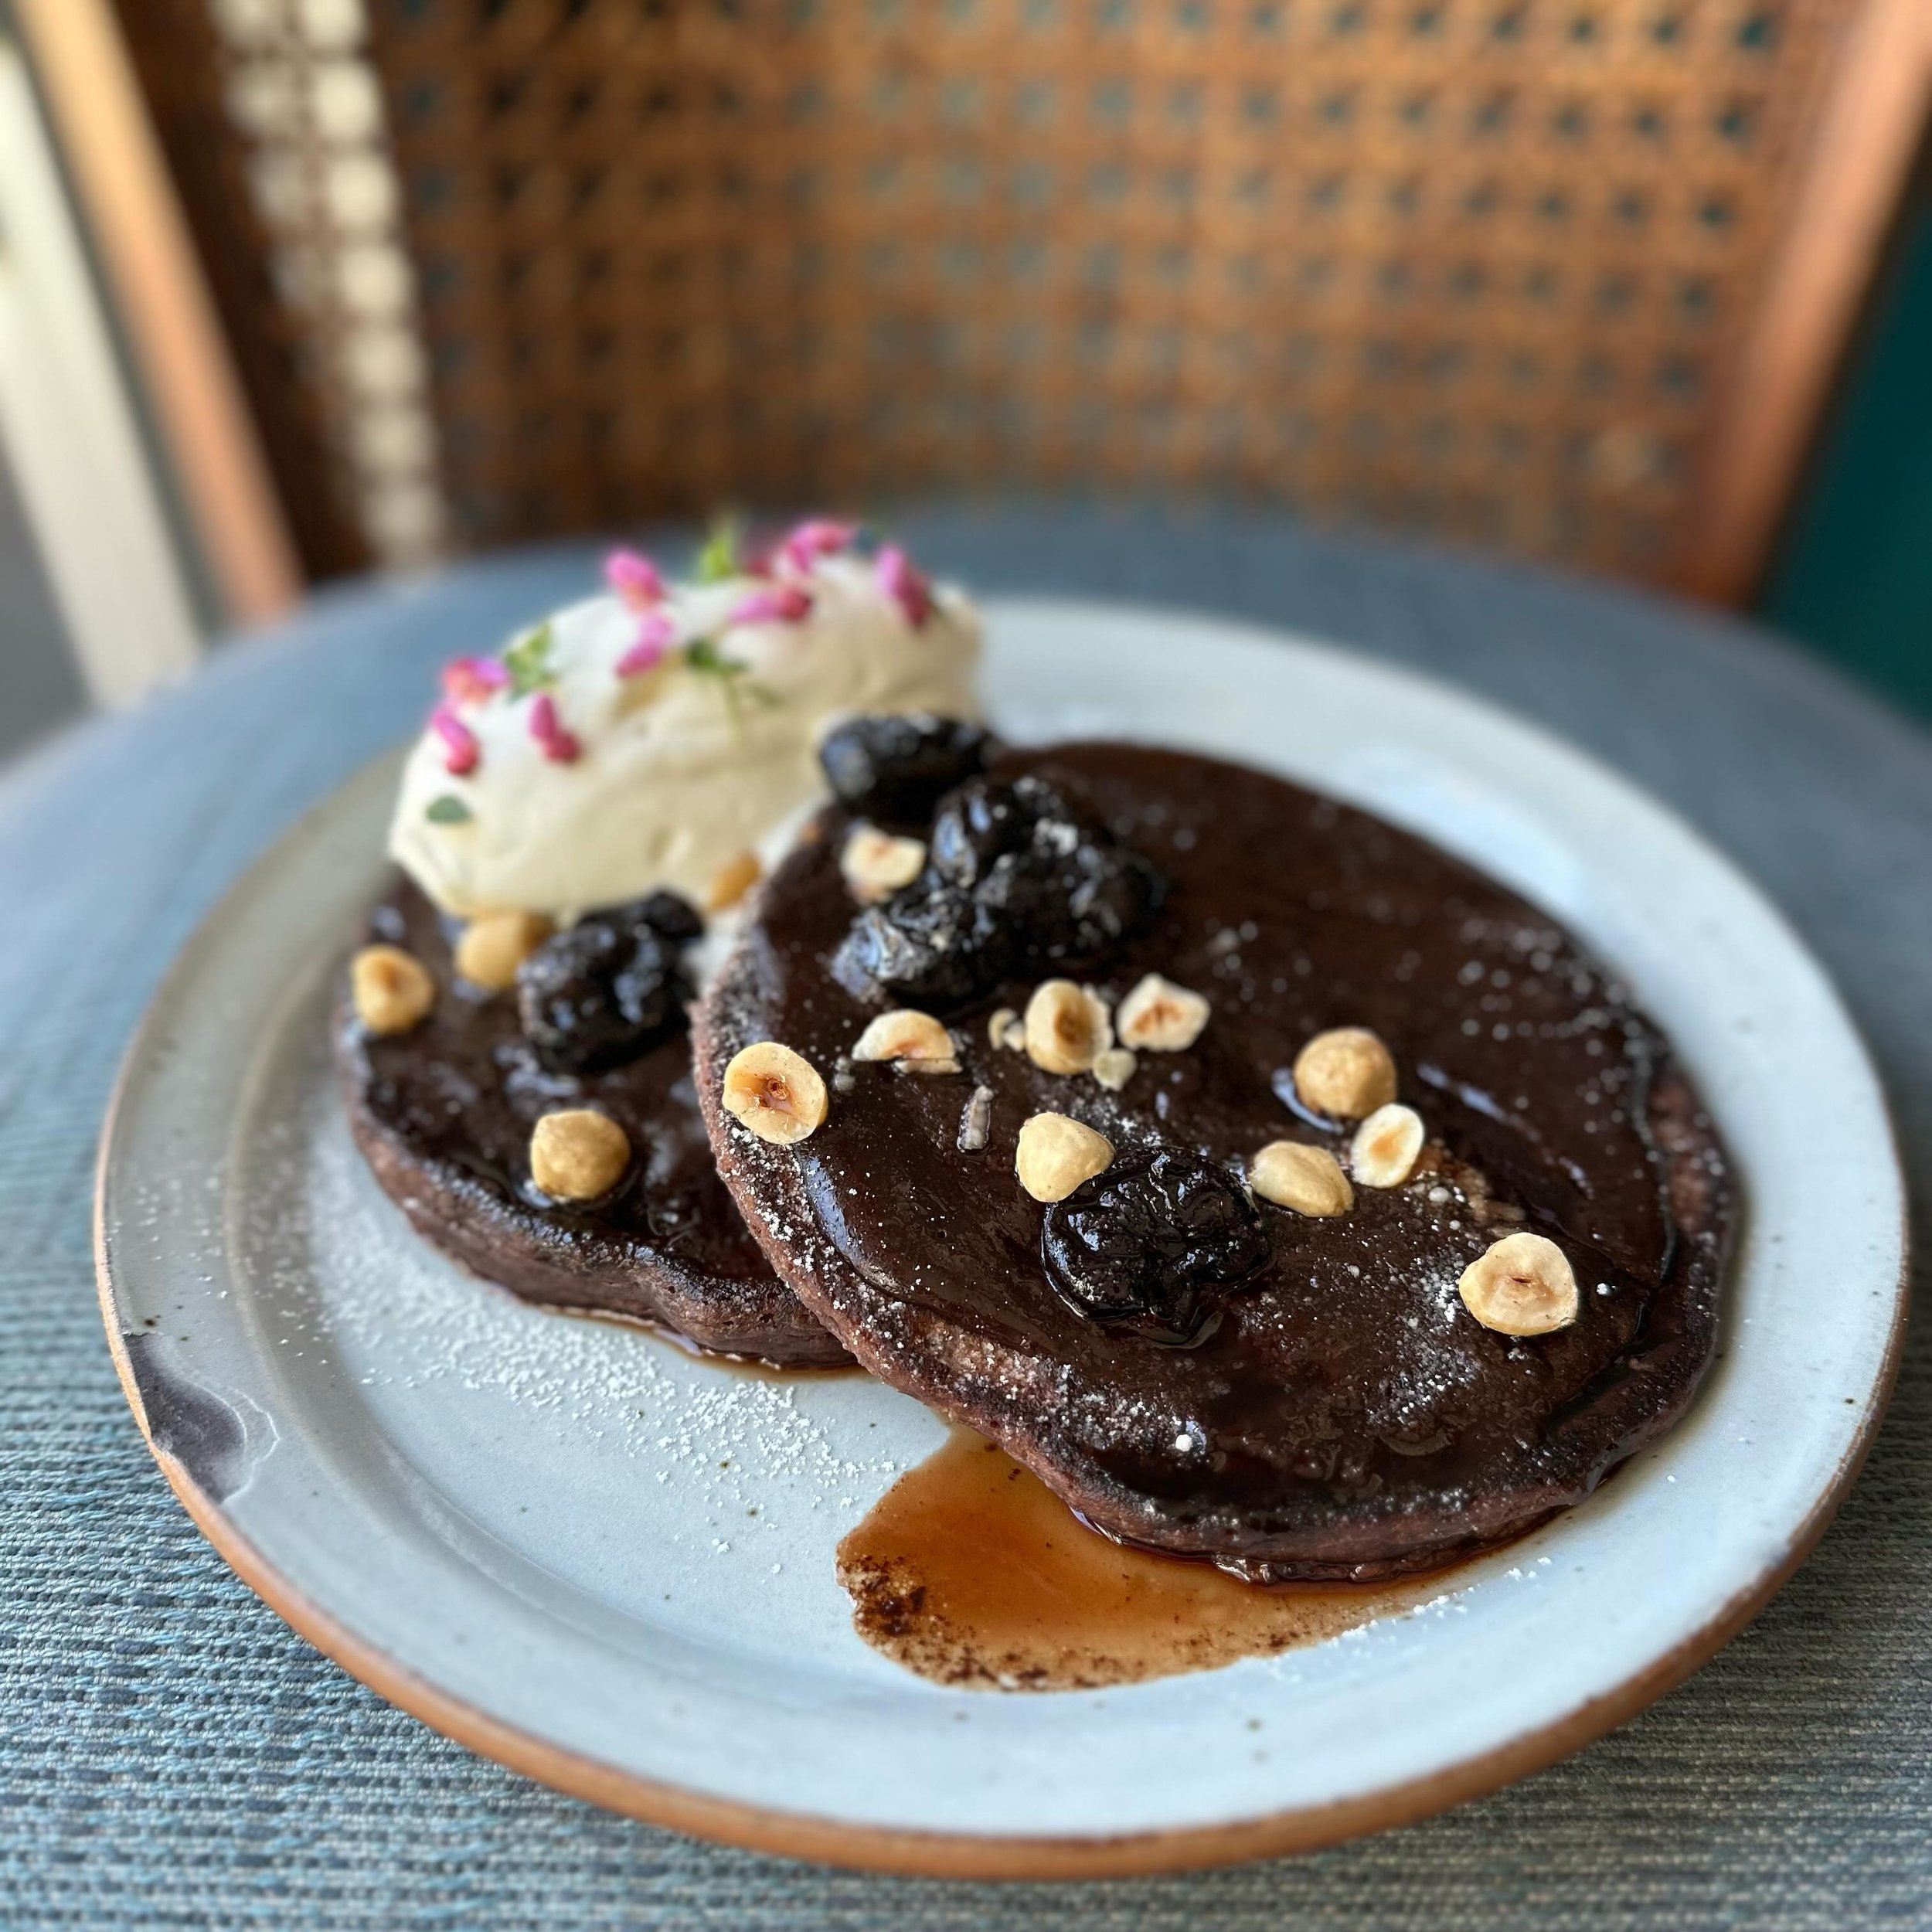 Chocolate-sourdough pancakes
Ganache + cherry molasses syrup
Chantilly cream + local flowers

On the brunch menu Sat + Sun from 10-2 
Cause you deserve fancy pancakes.
Book a table through @resy link in BIO 👆
❤️&zwj;🔥

#bakerstable #bakerstablebrun